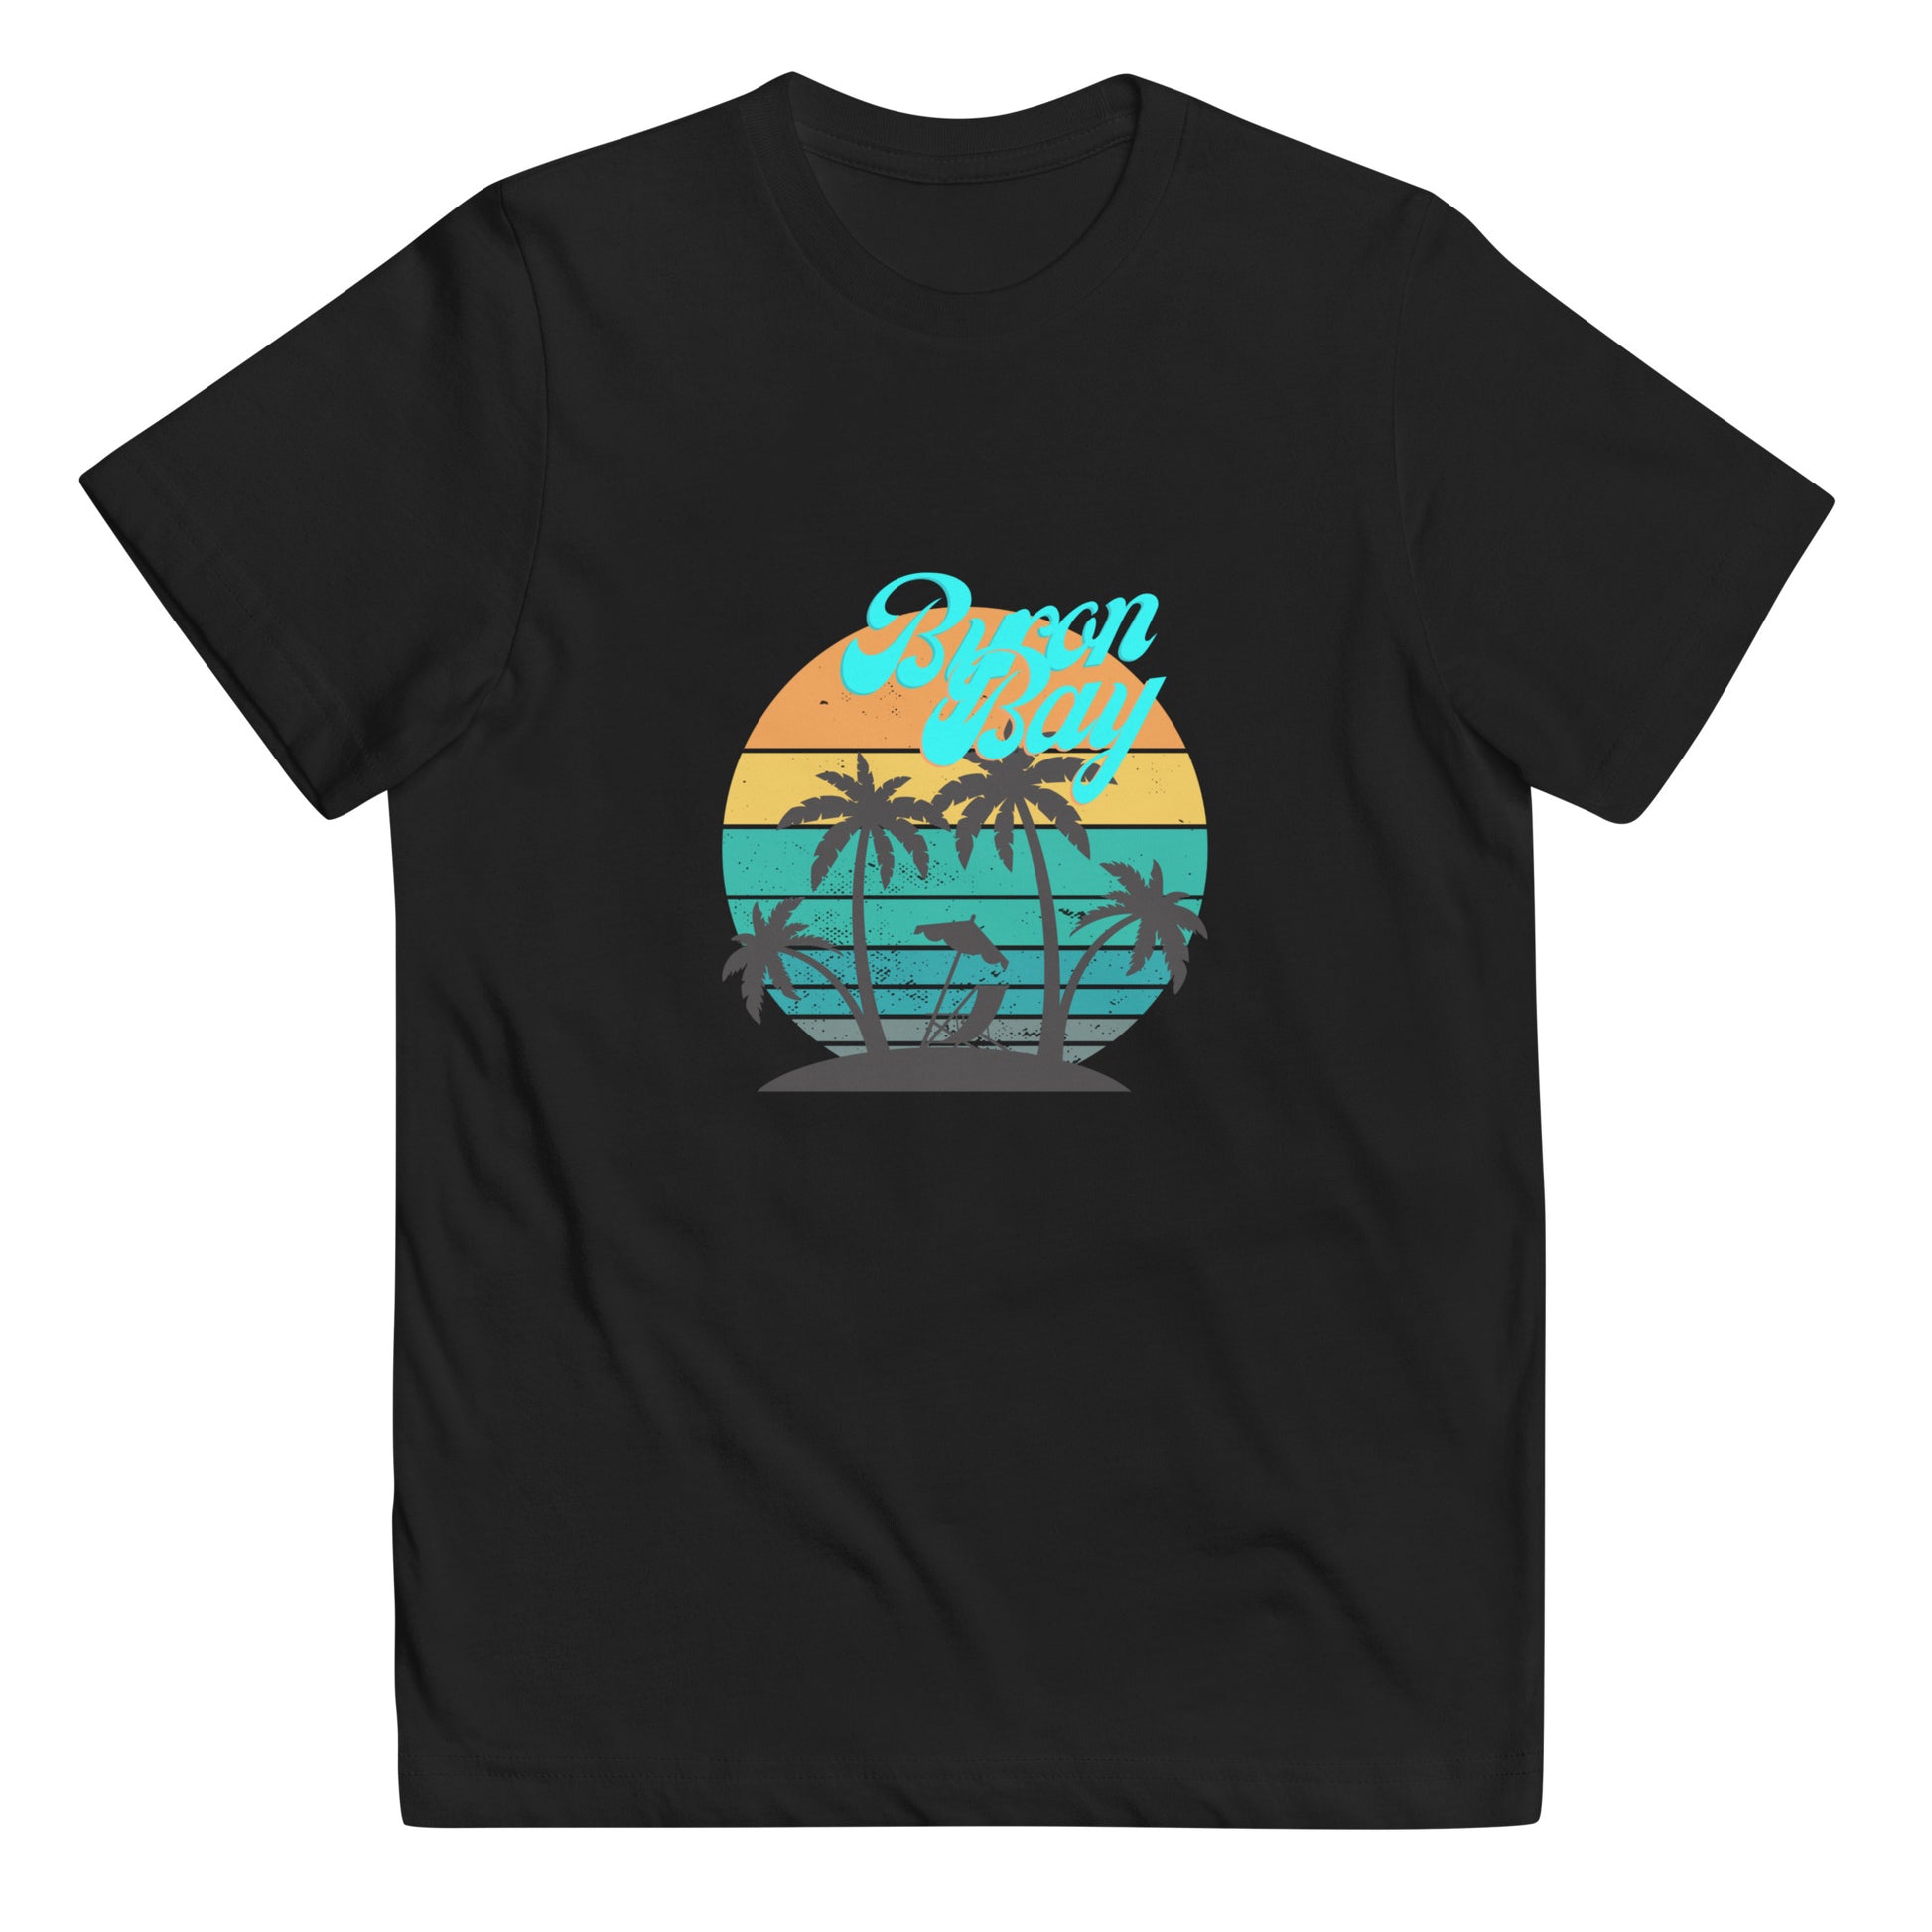  Kids T-Shirt - Black  - Front flat lay view - Byron Bay design on front - Genuine Byron Bay Merchandise | Produced by Go Sea Kayak Byron Bay 